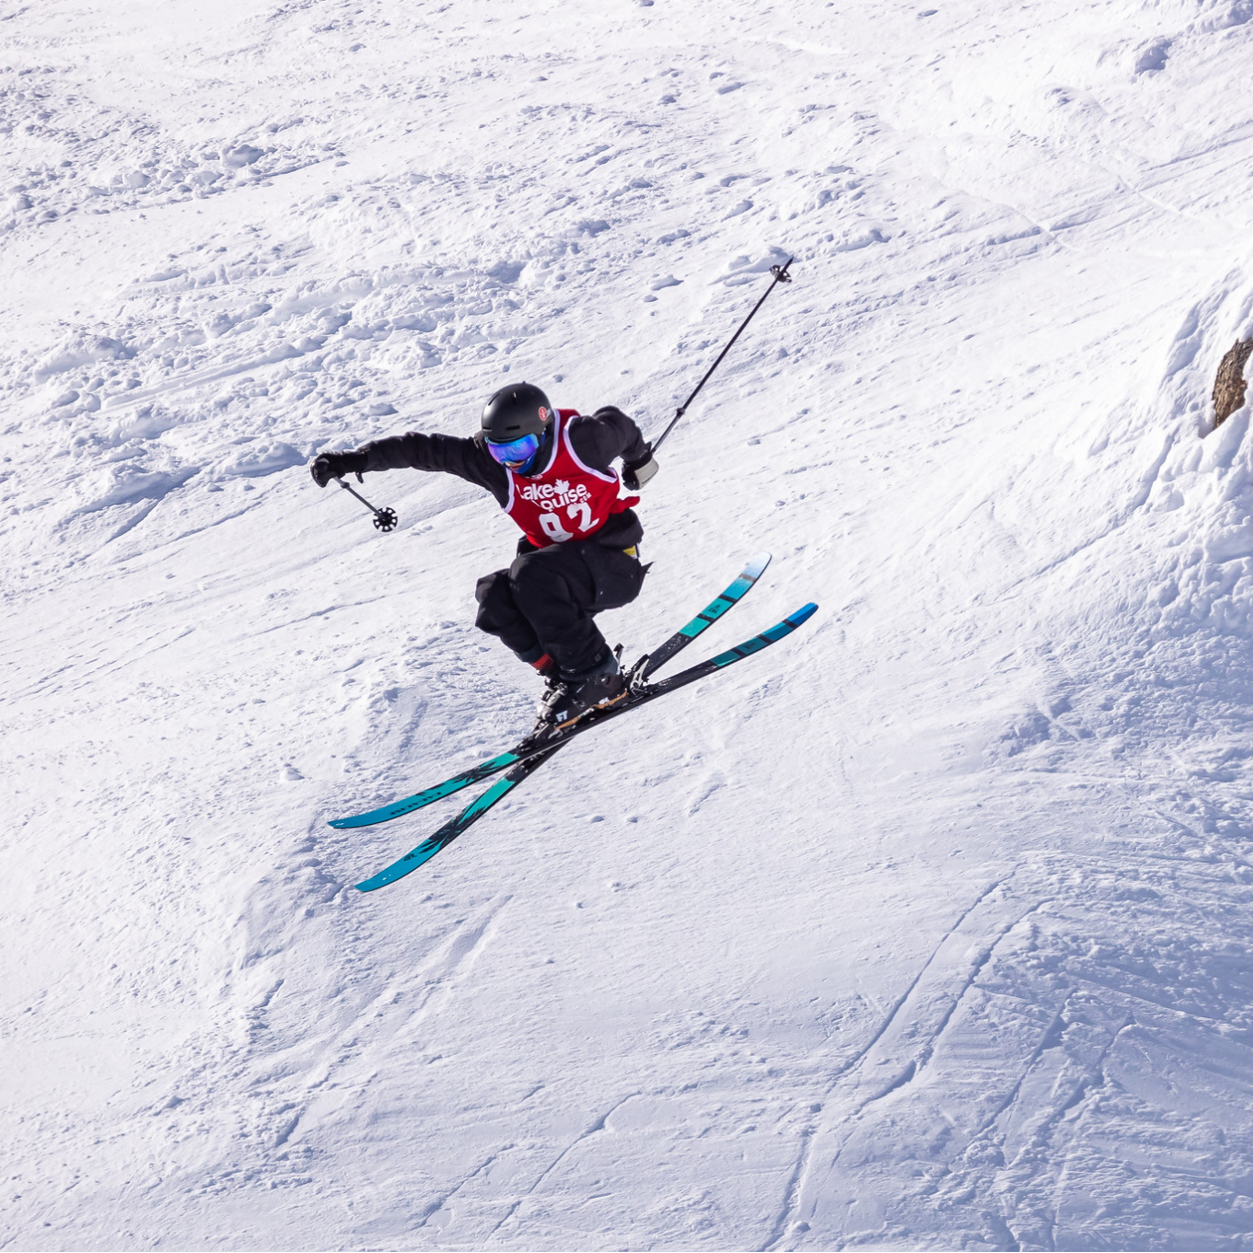 Ben Pelletier at a Lake Louise freeride ski competition - 2022